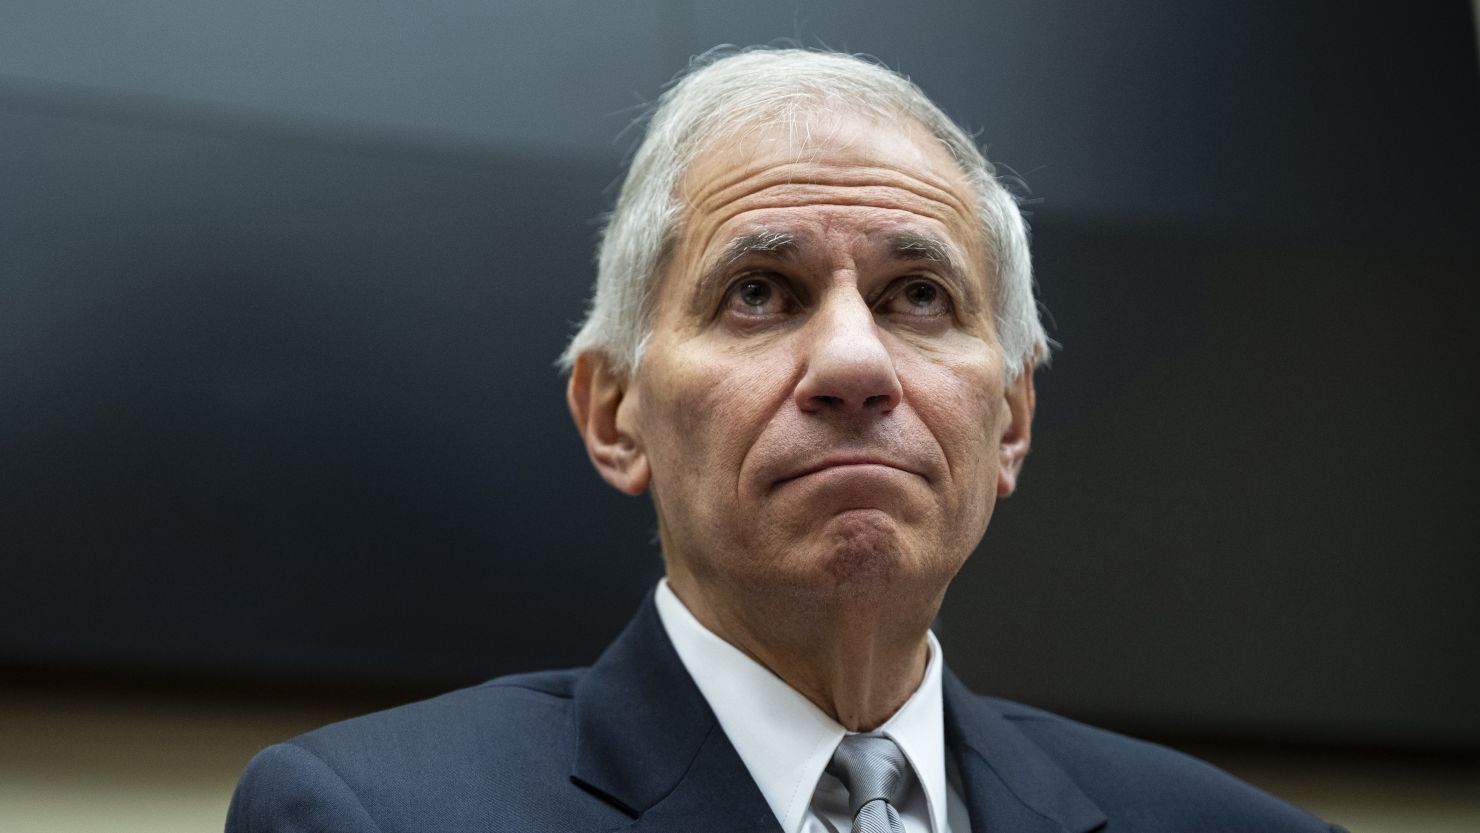 FDIC chair Martin Gruenberg to resign after sexual harassment allegations